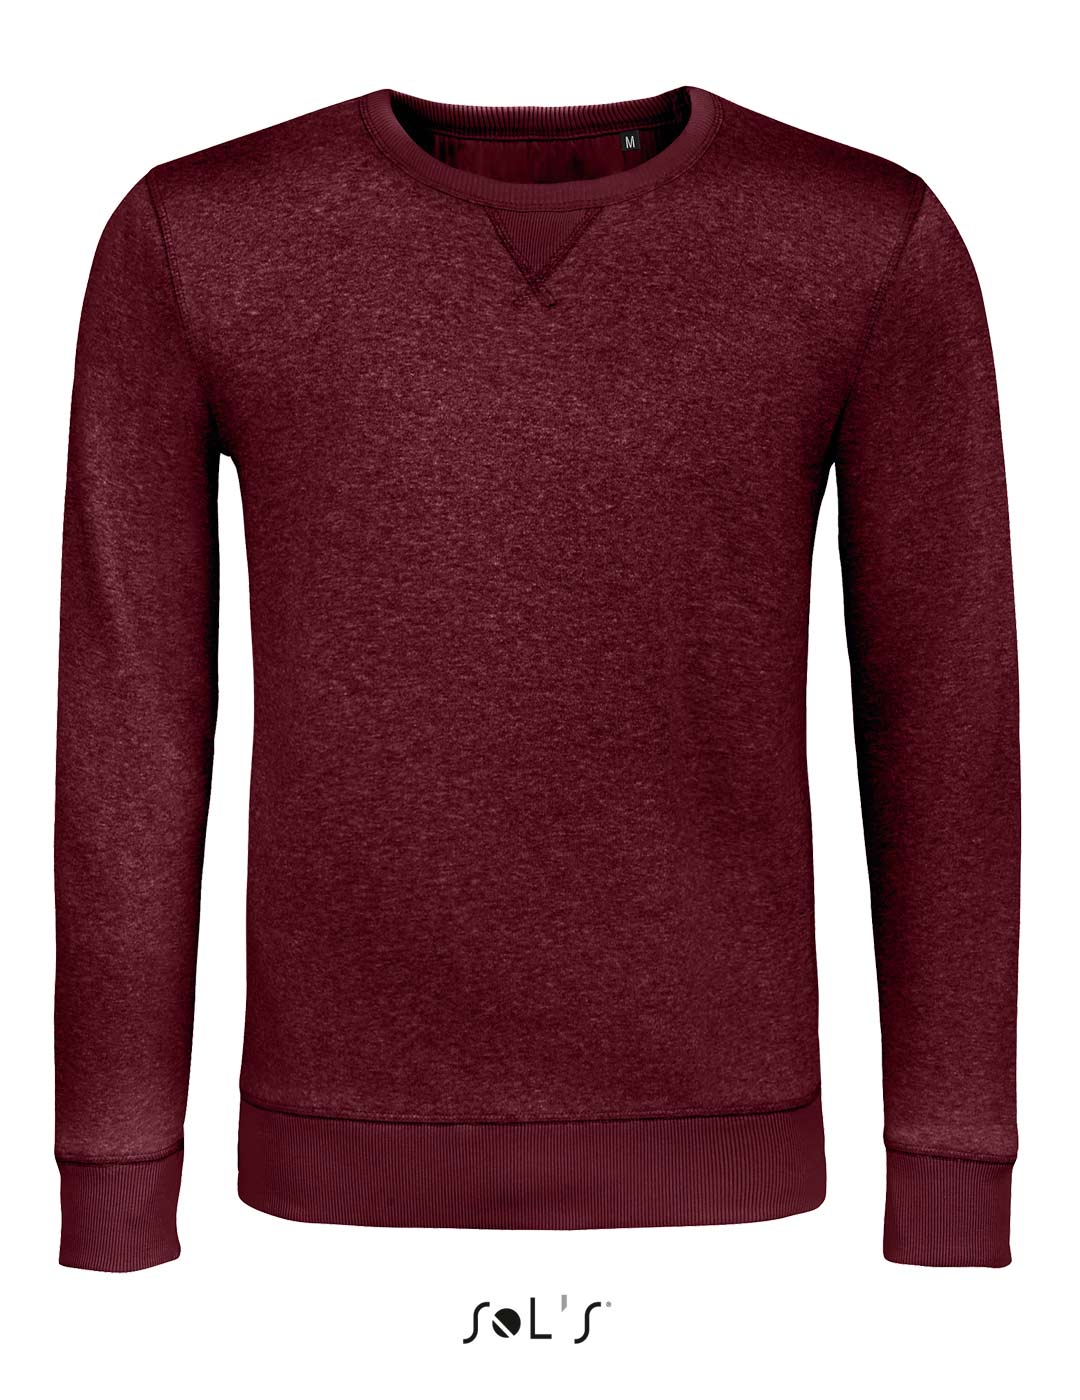 Sully 02990 heather oxblood a